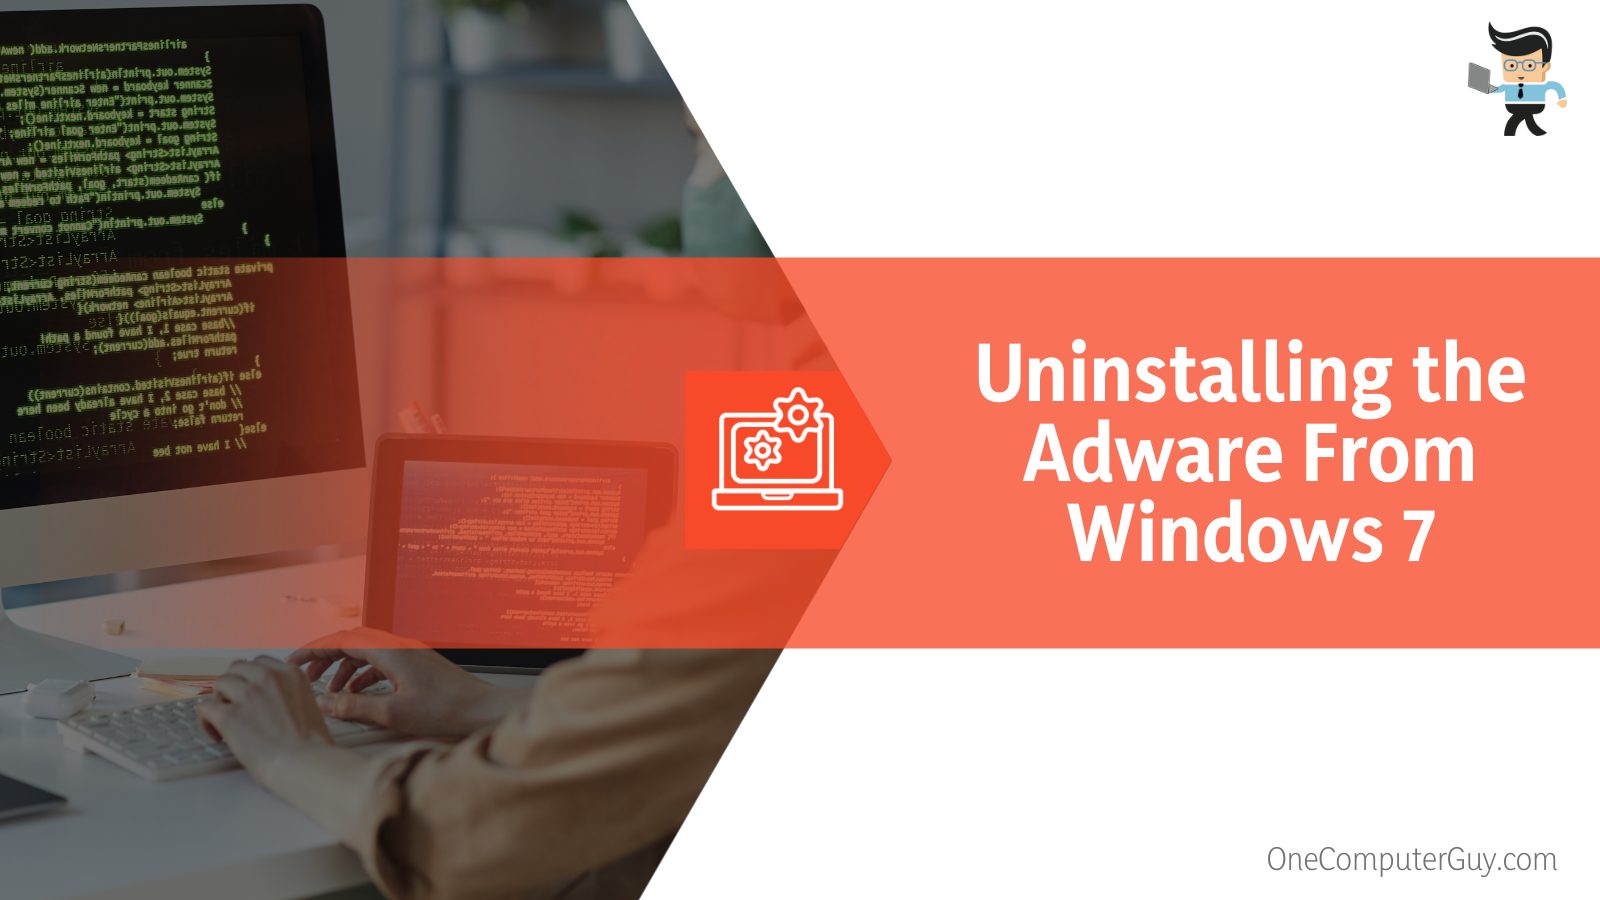 Uninstalling the Adware From Windows 7